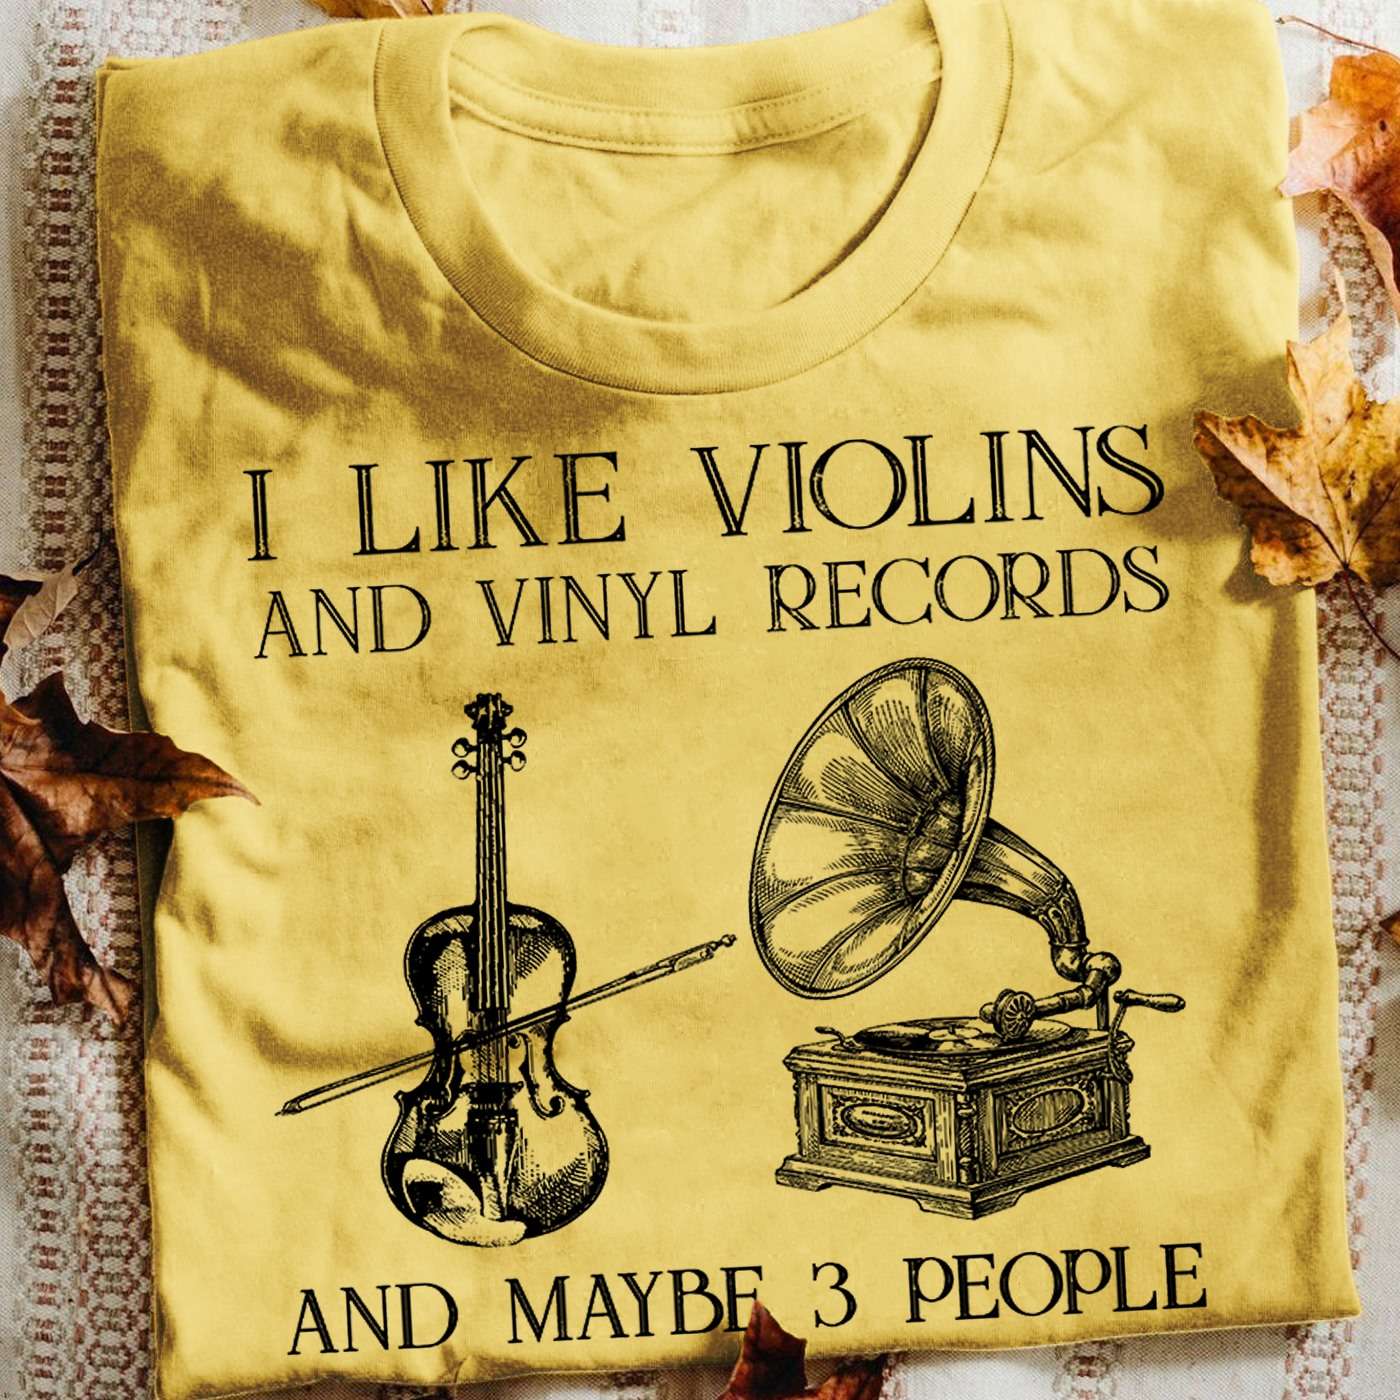 I like violins and vinyl records and maybe 3 people - Love music instrument